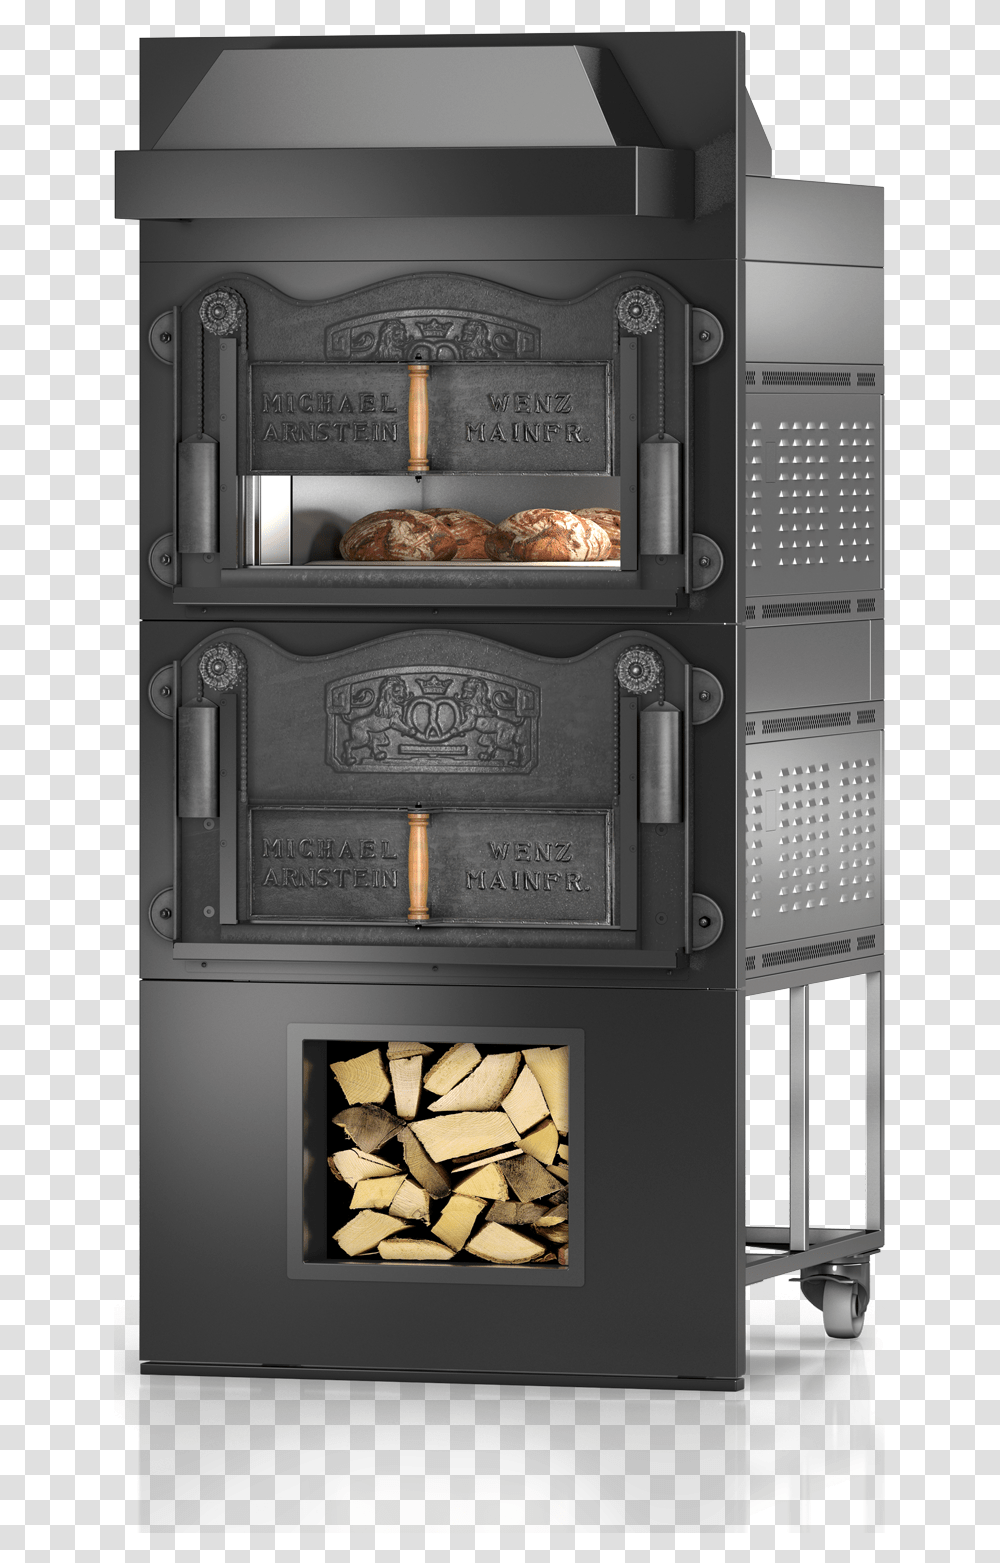 Miwe Wenz, Oven, Appliance, Mailbox, Letterbox Transparent Png